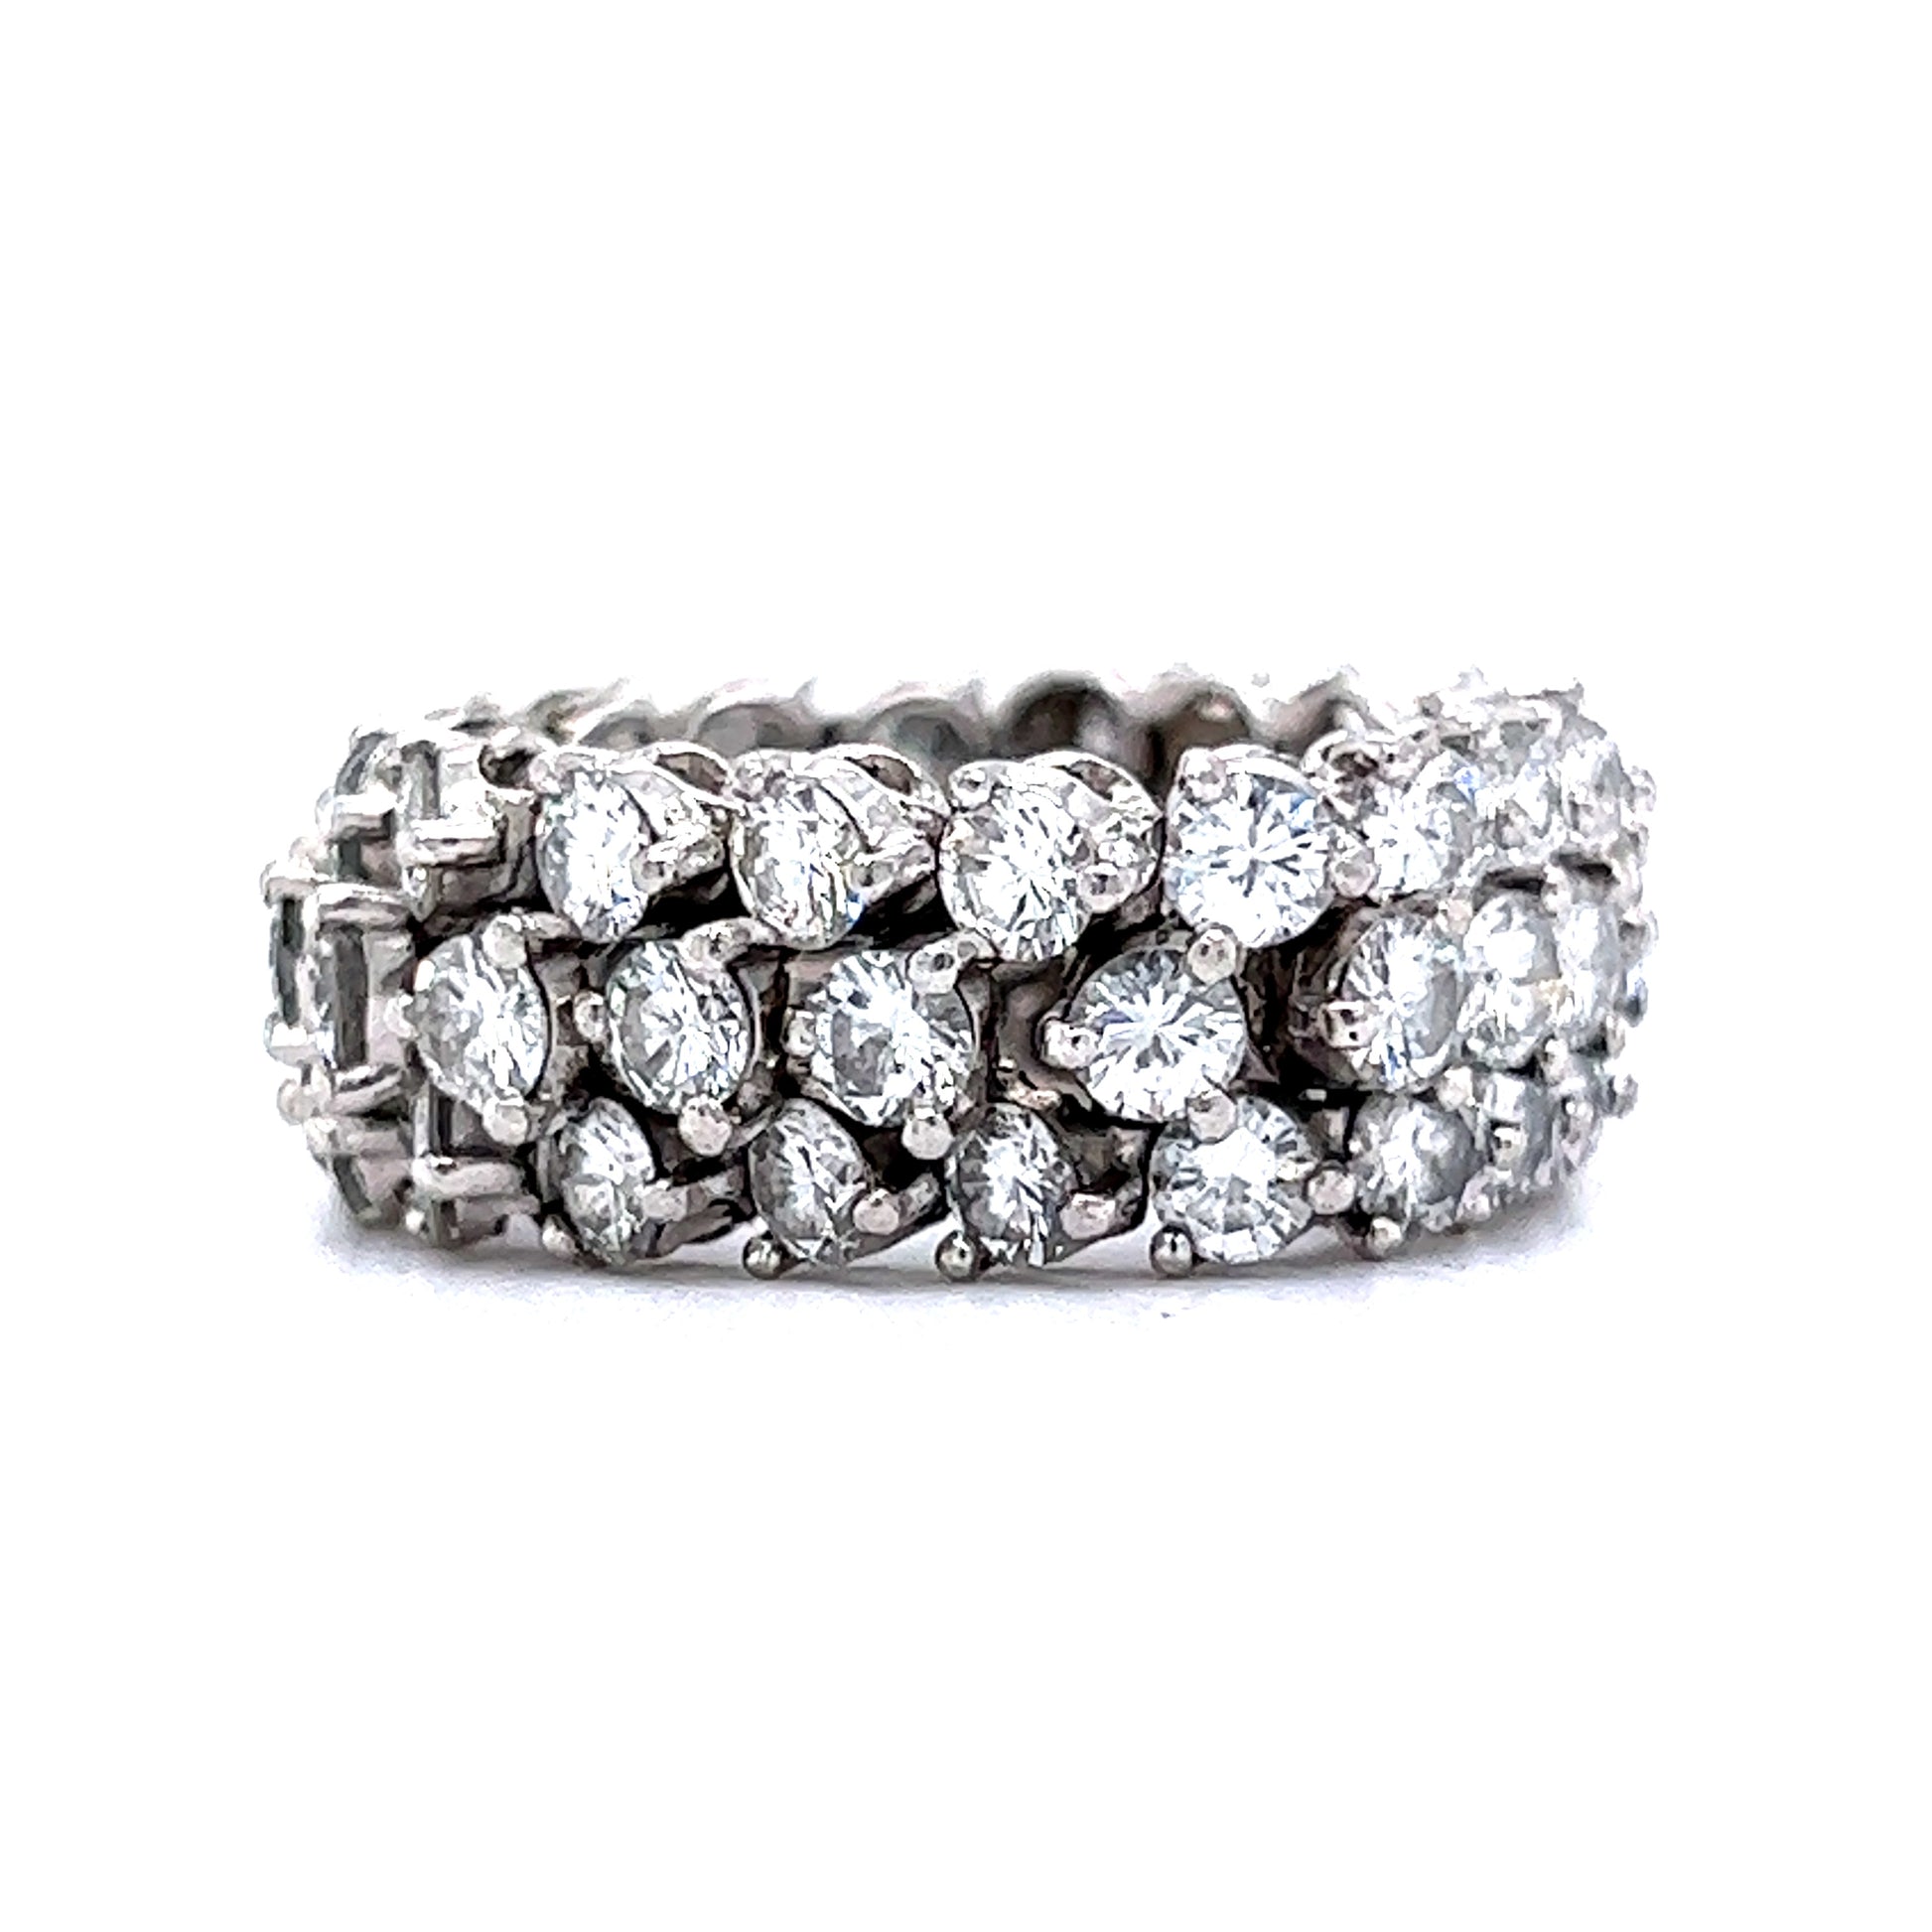 Flexible Diamond Eternity Band in PlatinumComposition: PlatinumRing Size: 7.5Total Diamond Weight: 5.60 ctTotal Gram Weight: 11.20 gInscription: 566